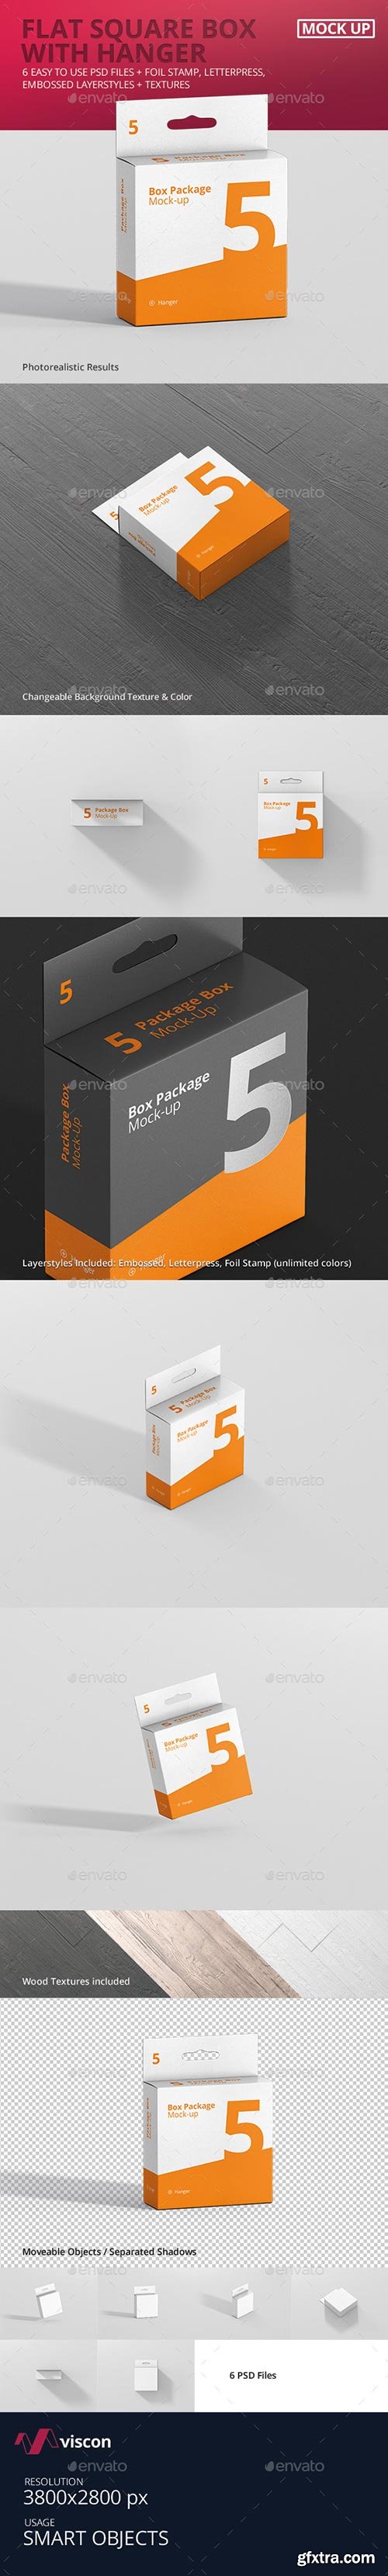 Graphicriver - Package Box Mock-Up - Flat Square with Hanger 18069484